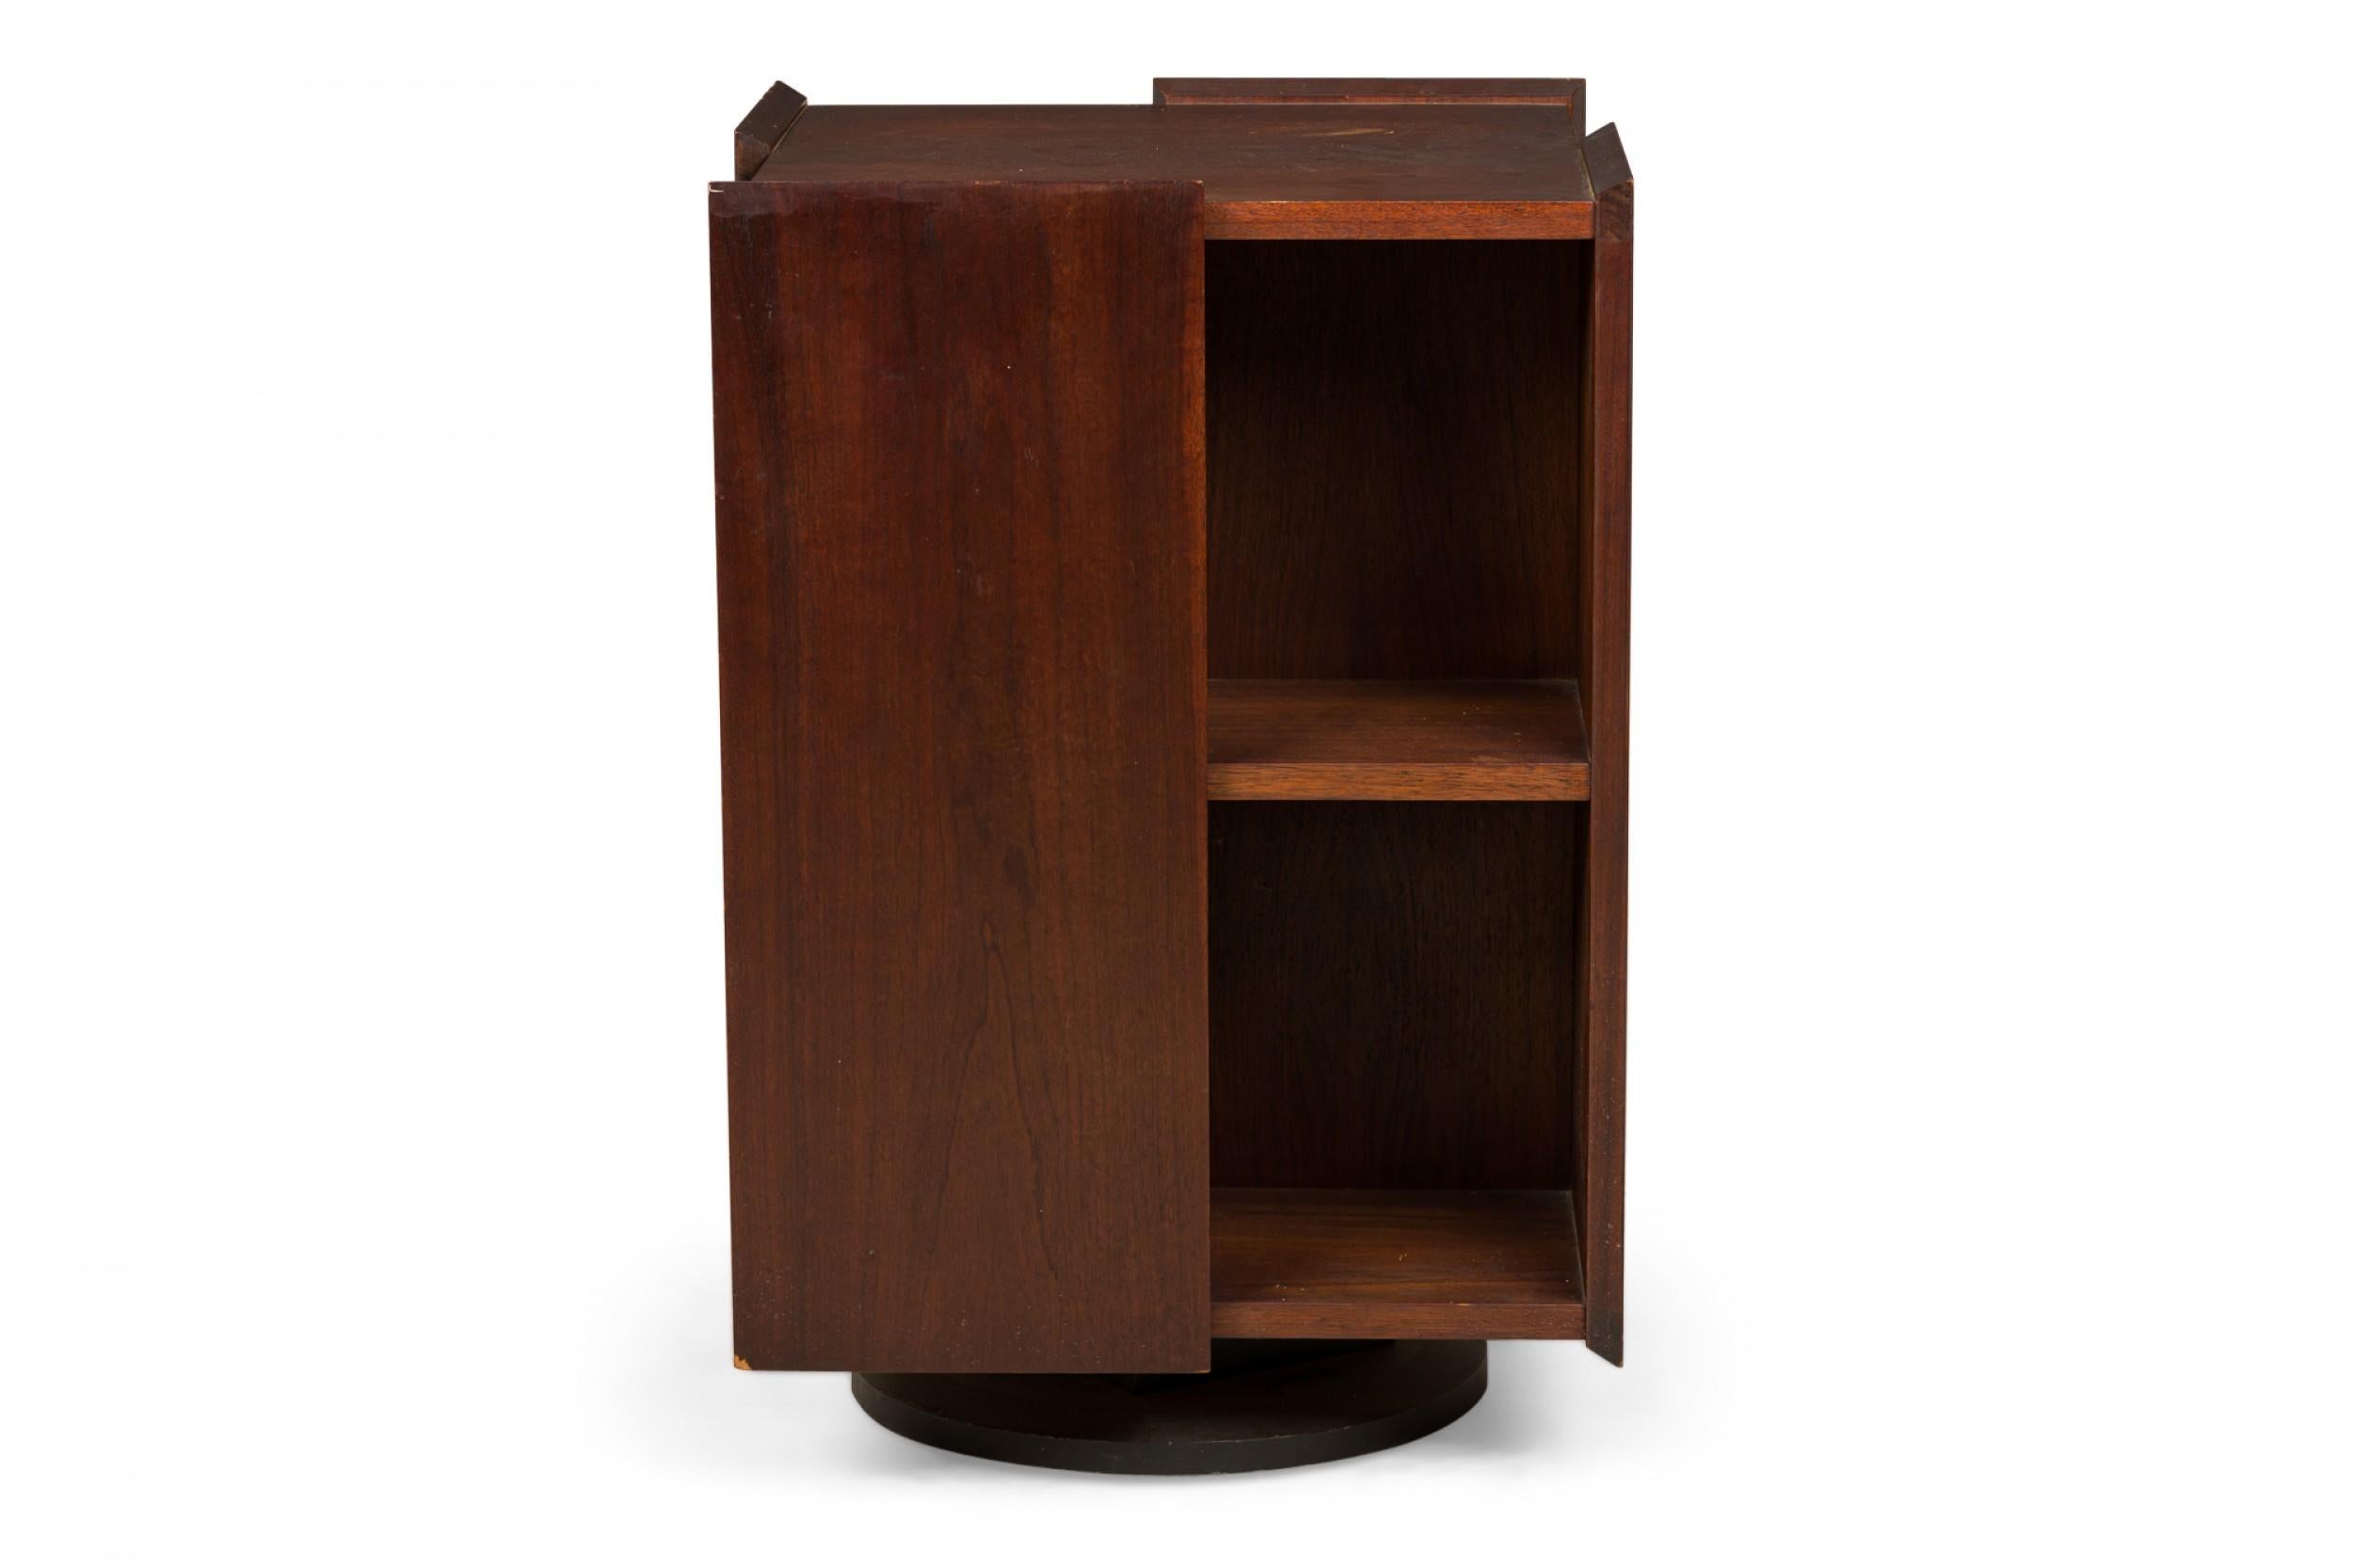 American mid-century dark walnut lazy susan mini-bookcase with a rectangular form of alternating panels and two compartment shelves on each side, on a fully rotational plinth base. (FOUNDERS)